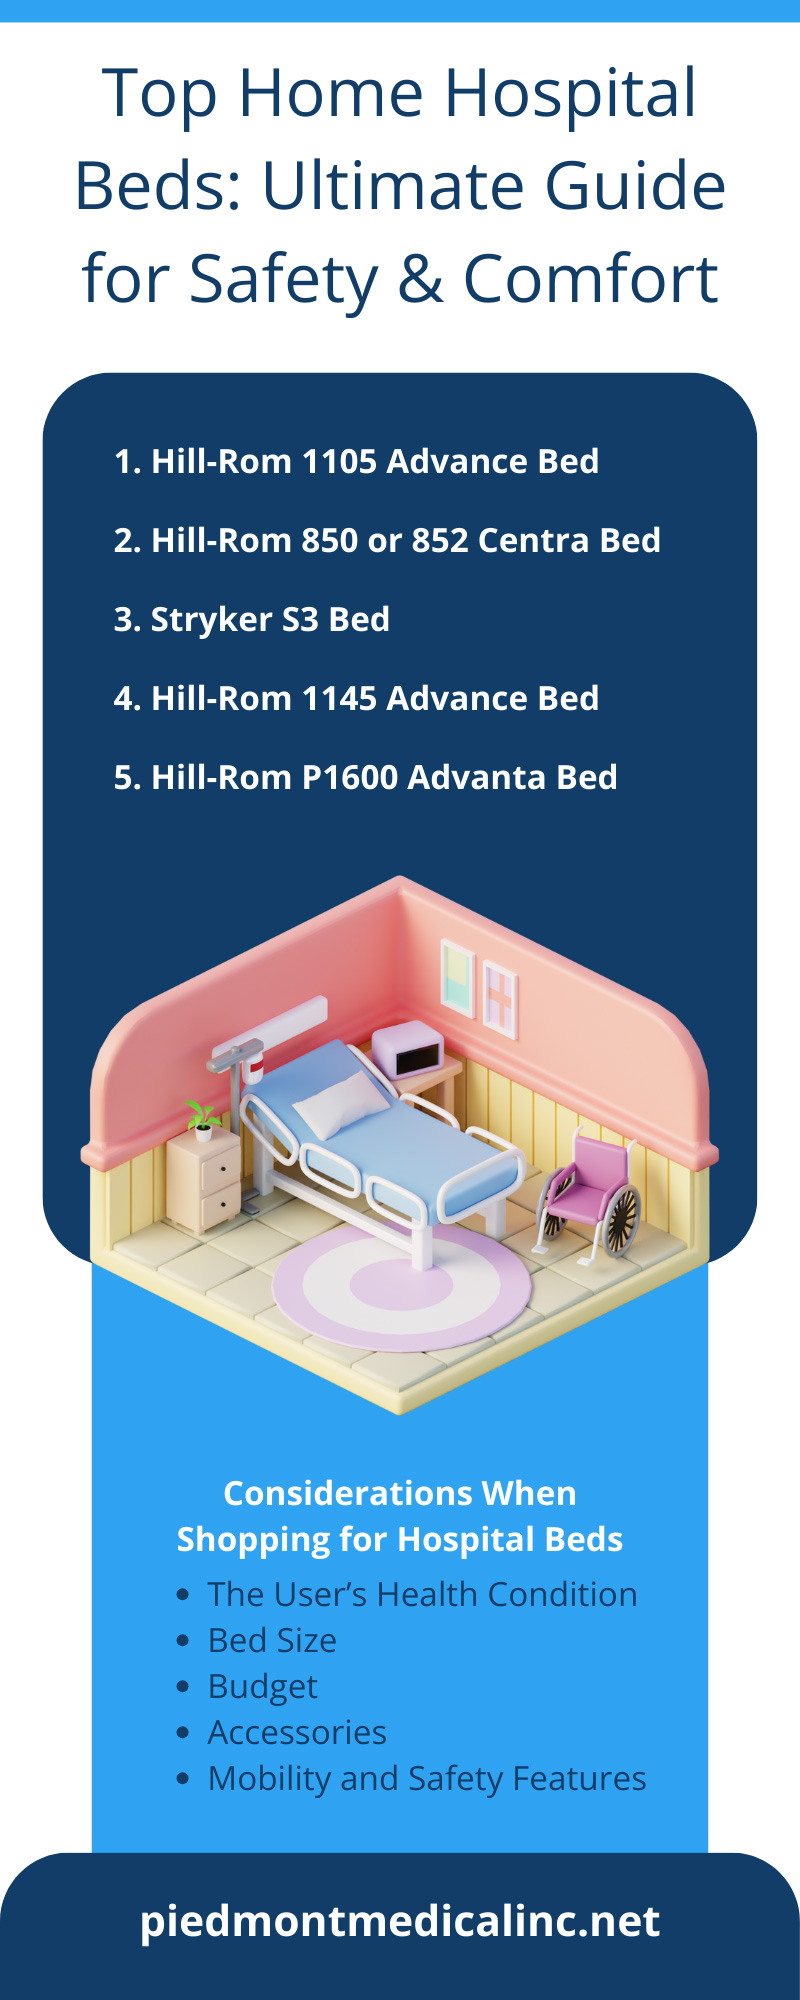 Top Home Hospital Beds: Ultimate Guide for Safety & Comfort